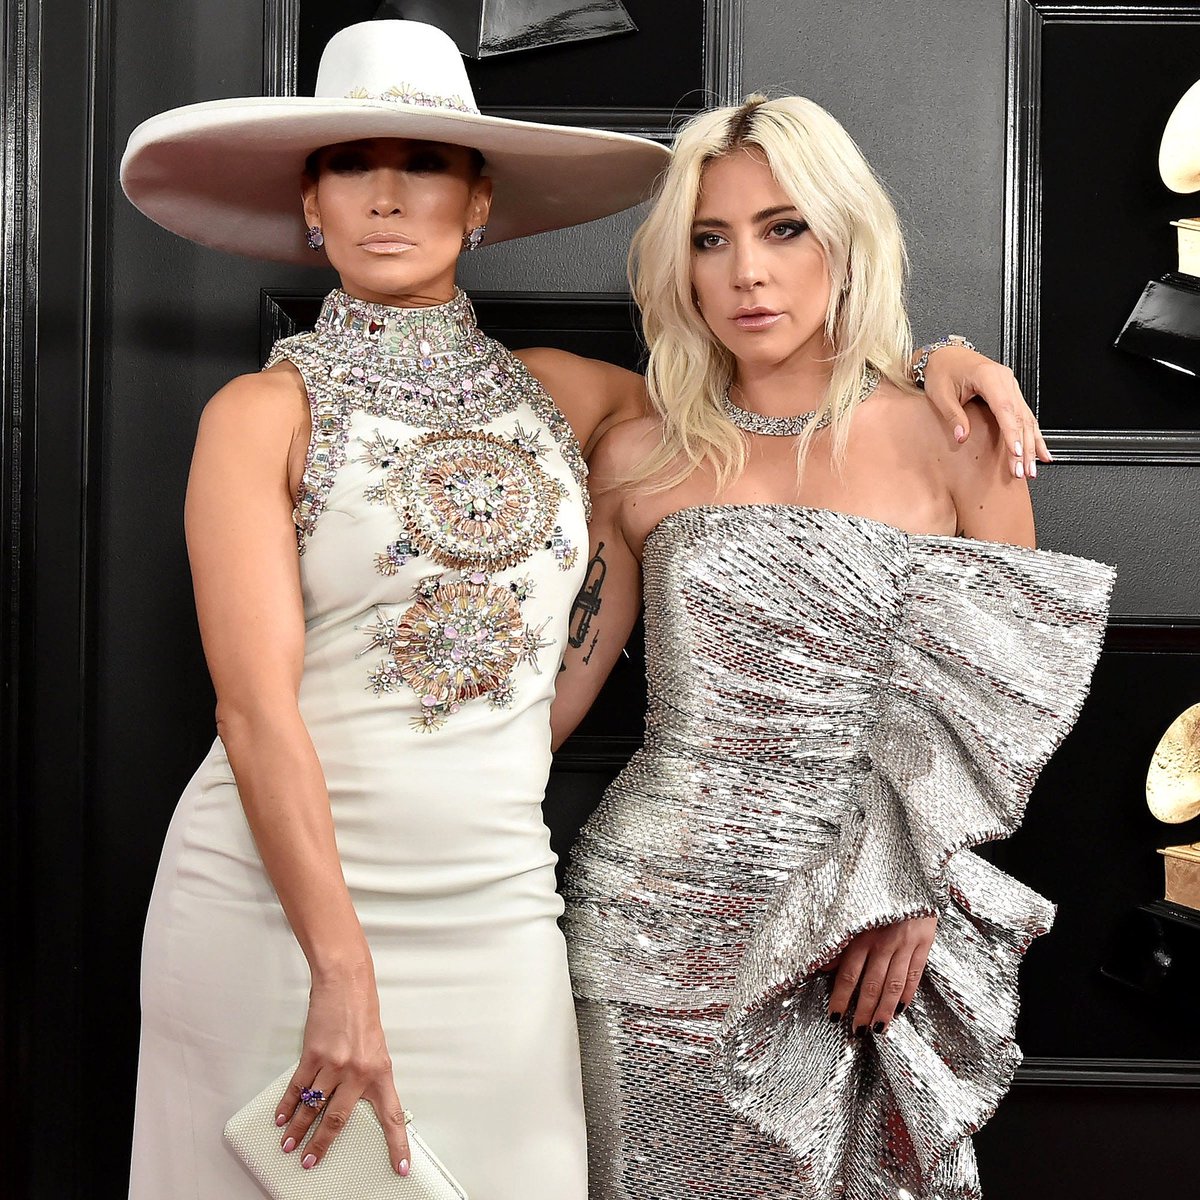 Jennifer Lopez: "Let me tell you something about Gaga, she is such a sweetheart. There is a graciousness about her. I really like her, I like what she stands for, kind of like coloring out the lines and being outside the box, being accepted. I'm really happy for her success."